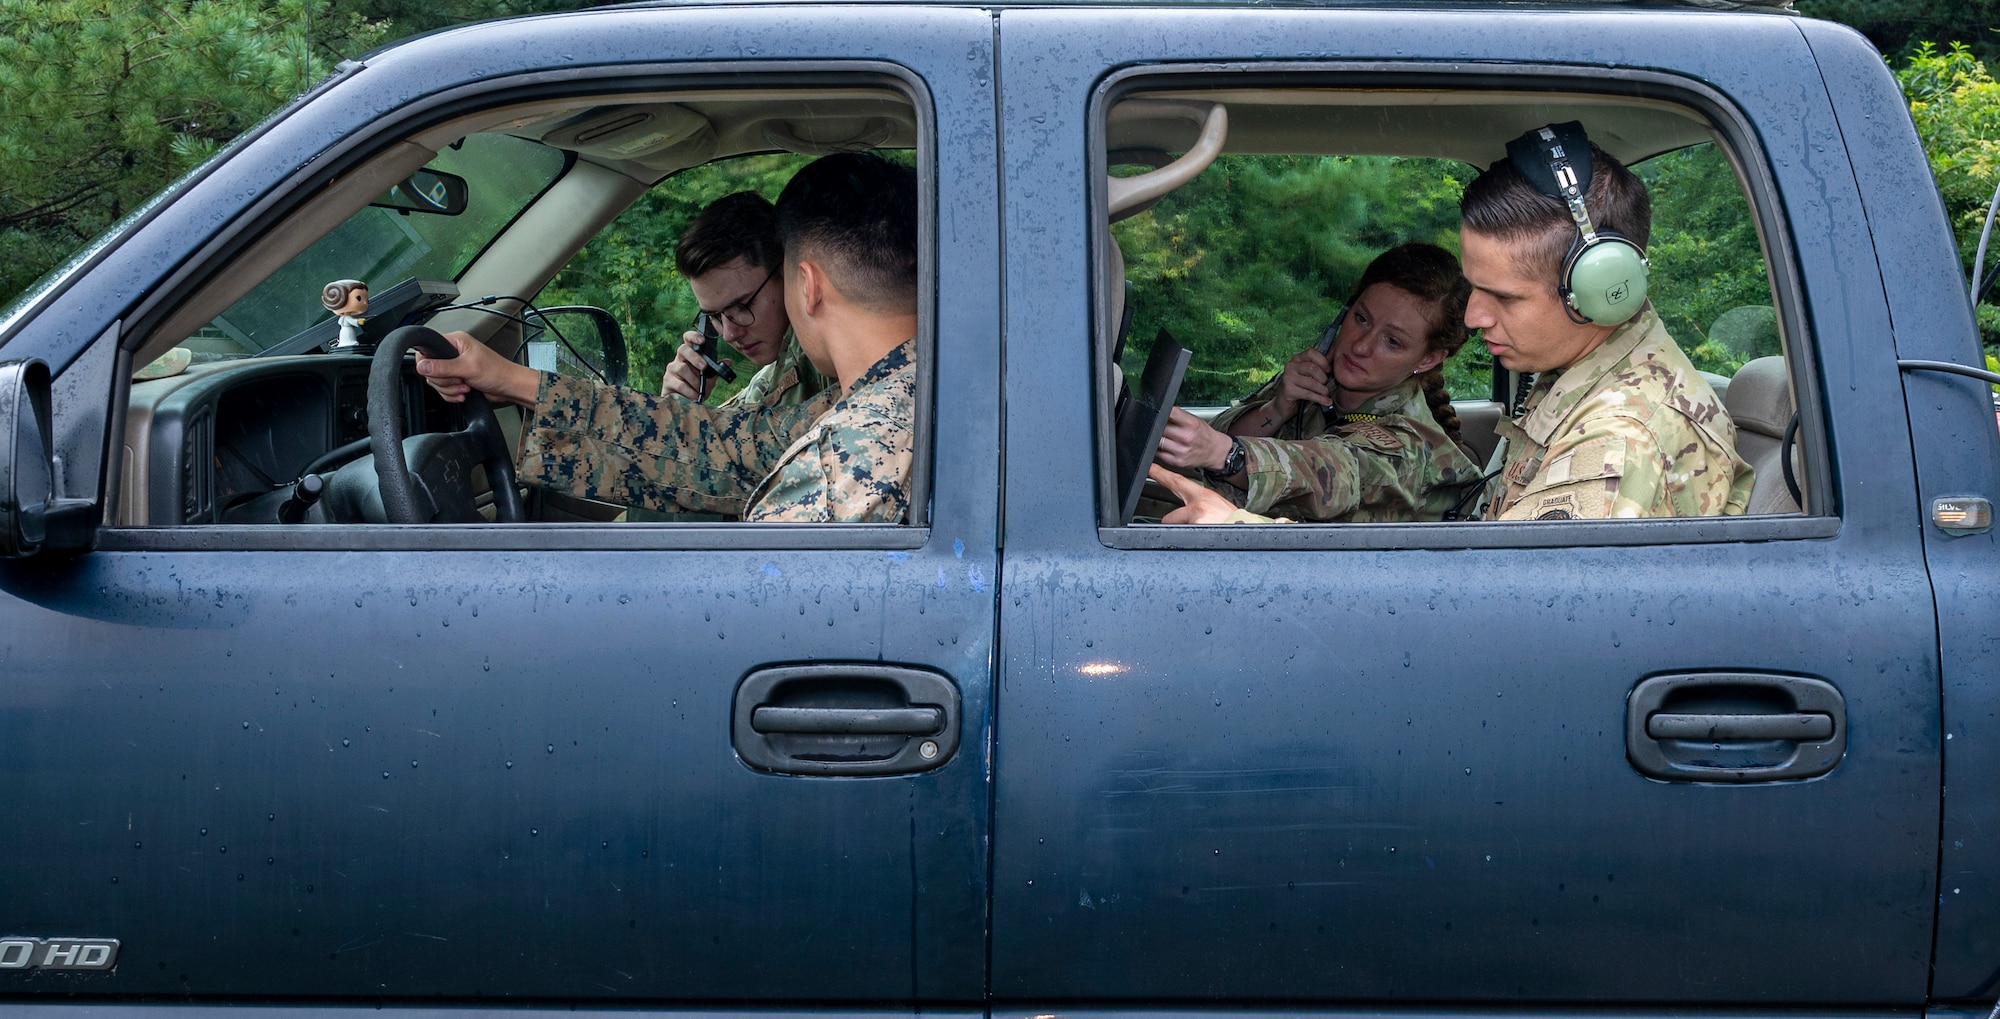 Airmen assigned to the 621st Air Control Squadron simulate mobile command and control (C2) from a vehicle at Yongin Army Base, Republic of Korea, Aug. 31, 2022.